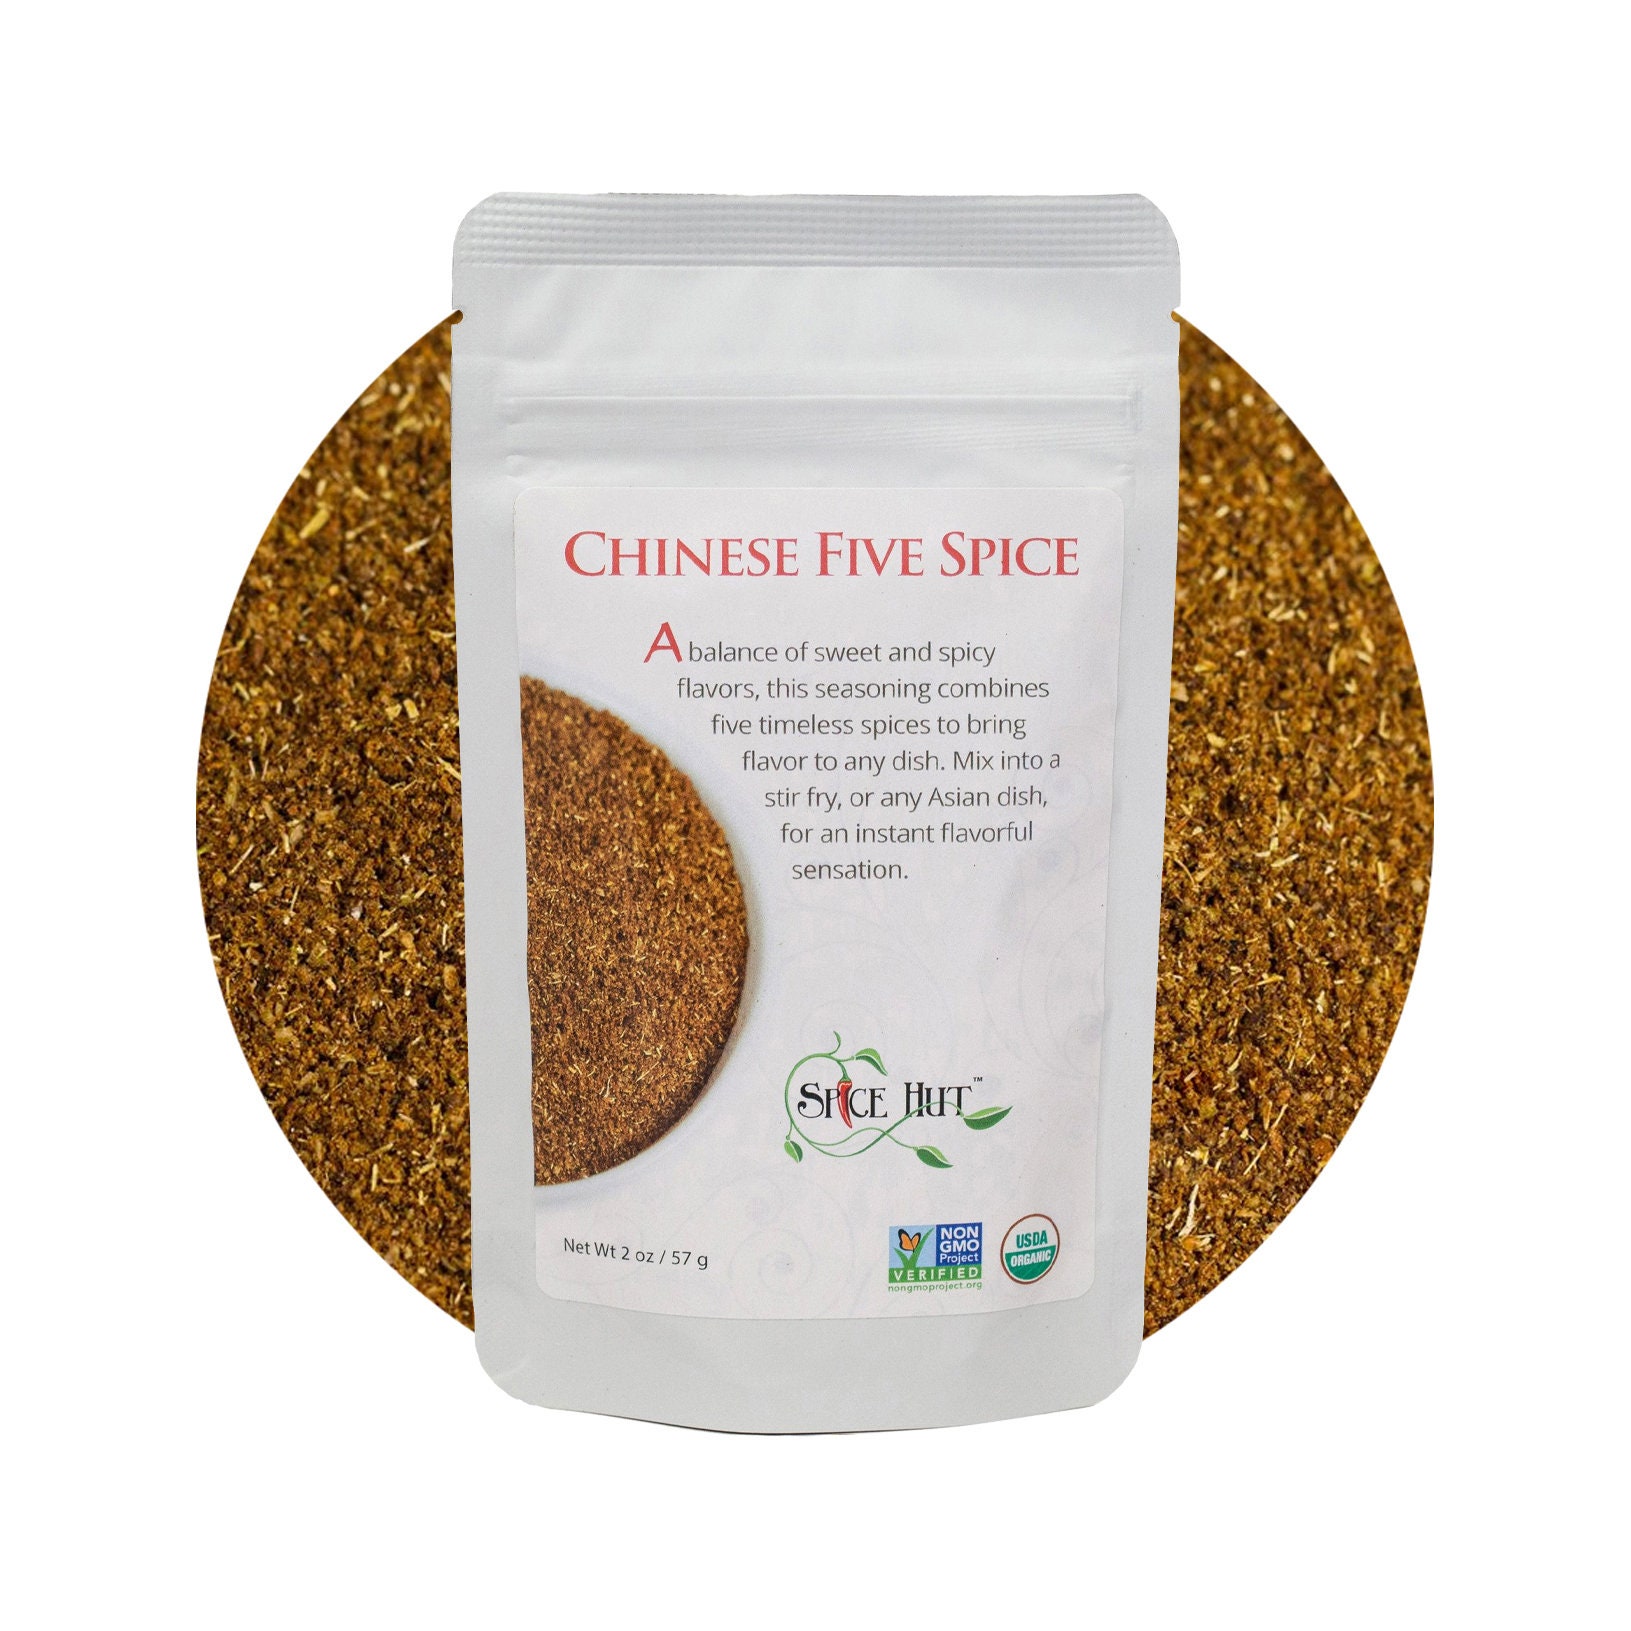 Organic Chinese Five Spice Seasoning Salt-free All-purpose Spice Mix, 5  Spice Powder for Asian Cooking Chinese Five Spice Powder Baking 